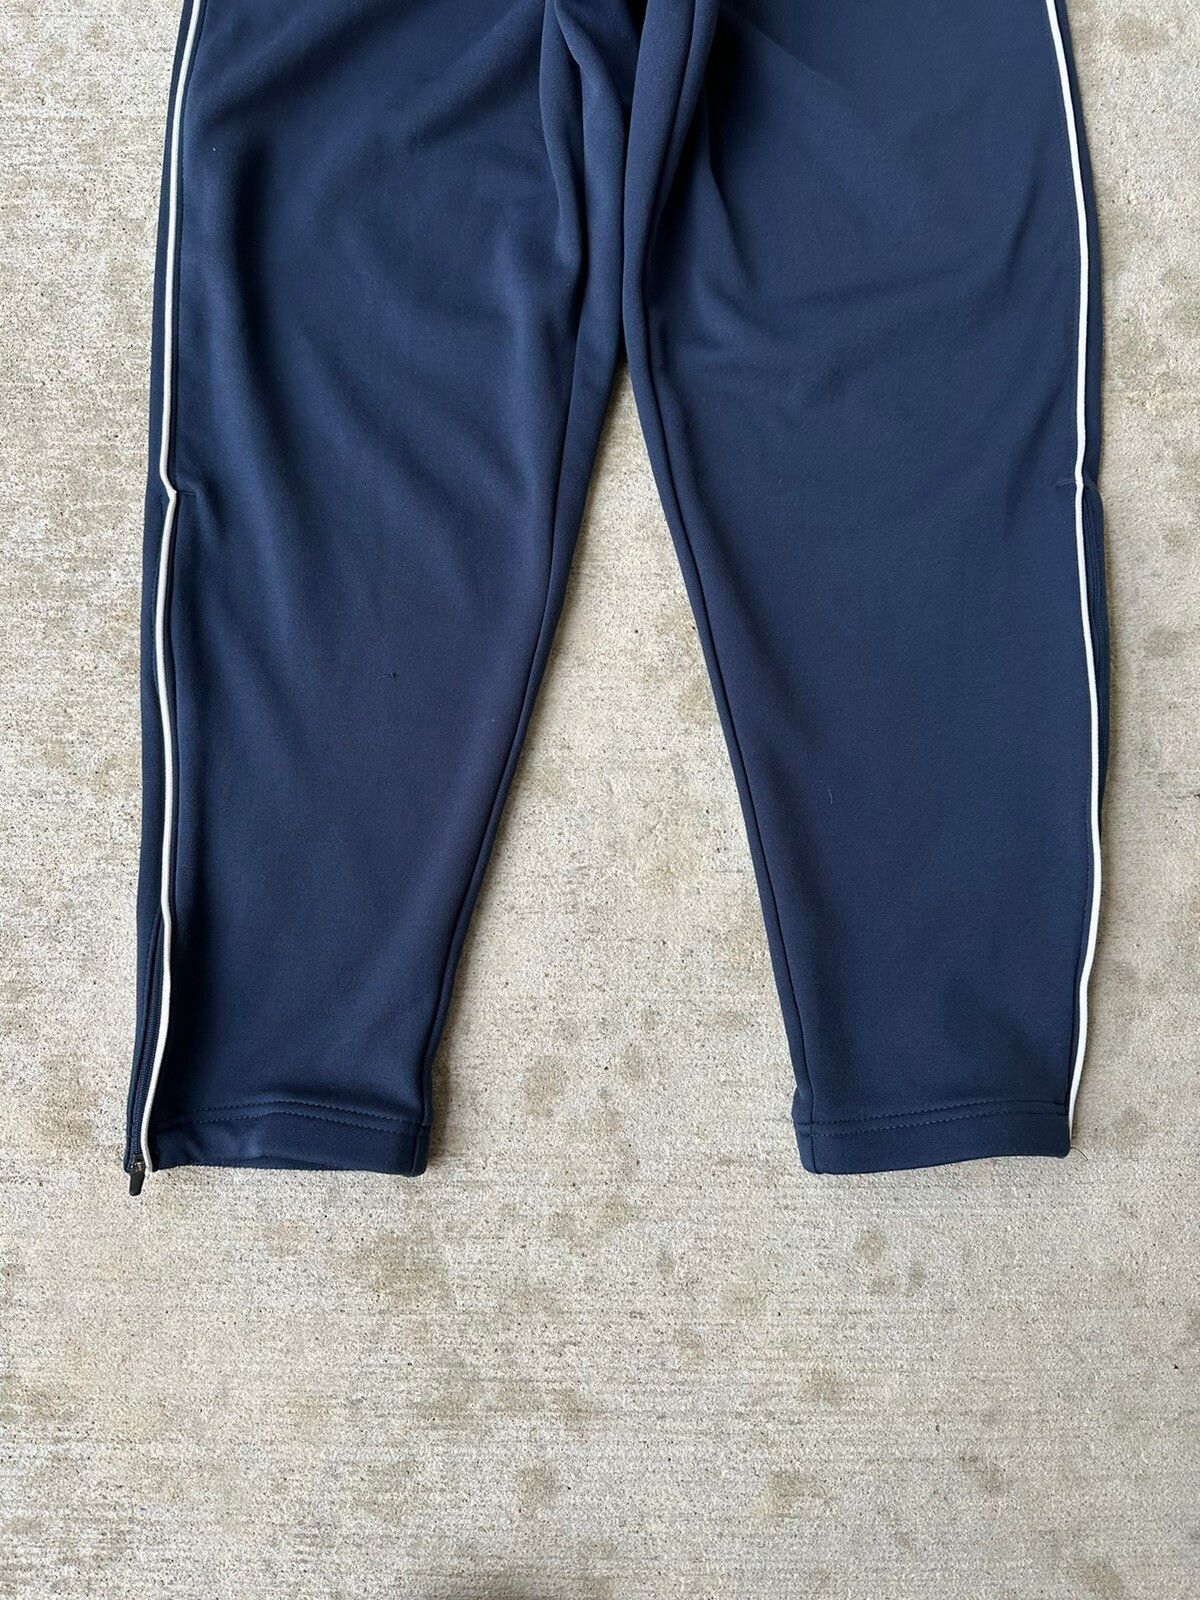 Nike Y2K Nike Track Drill Pants Size US 32 / EU 48 - 2 Preview